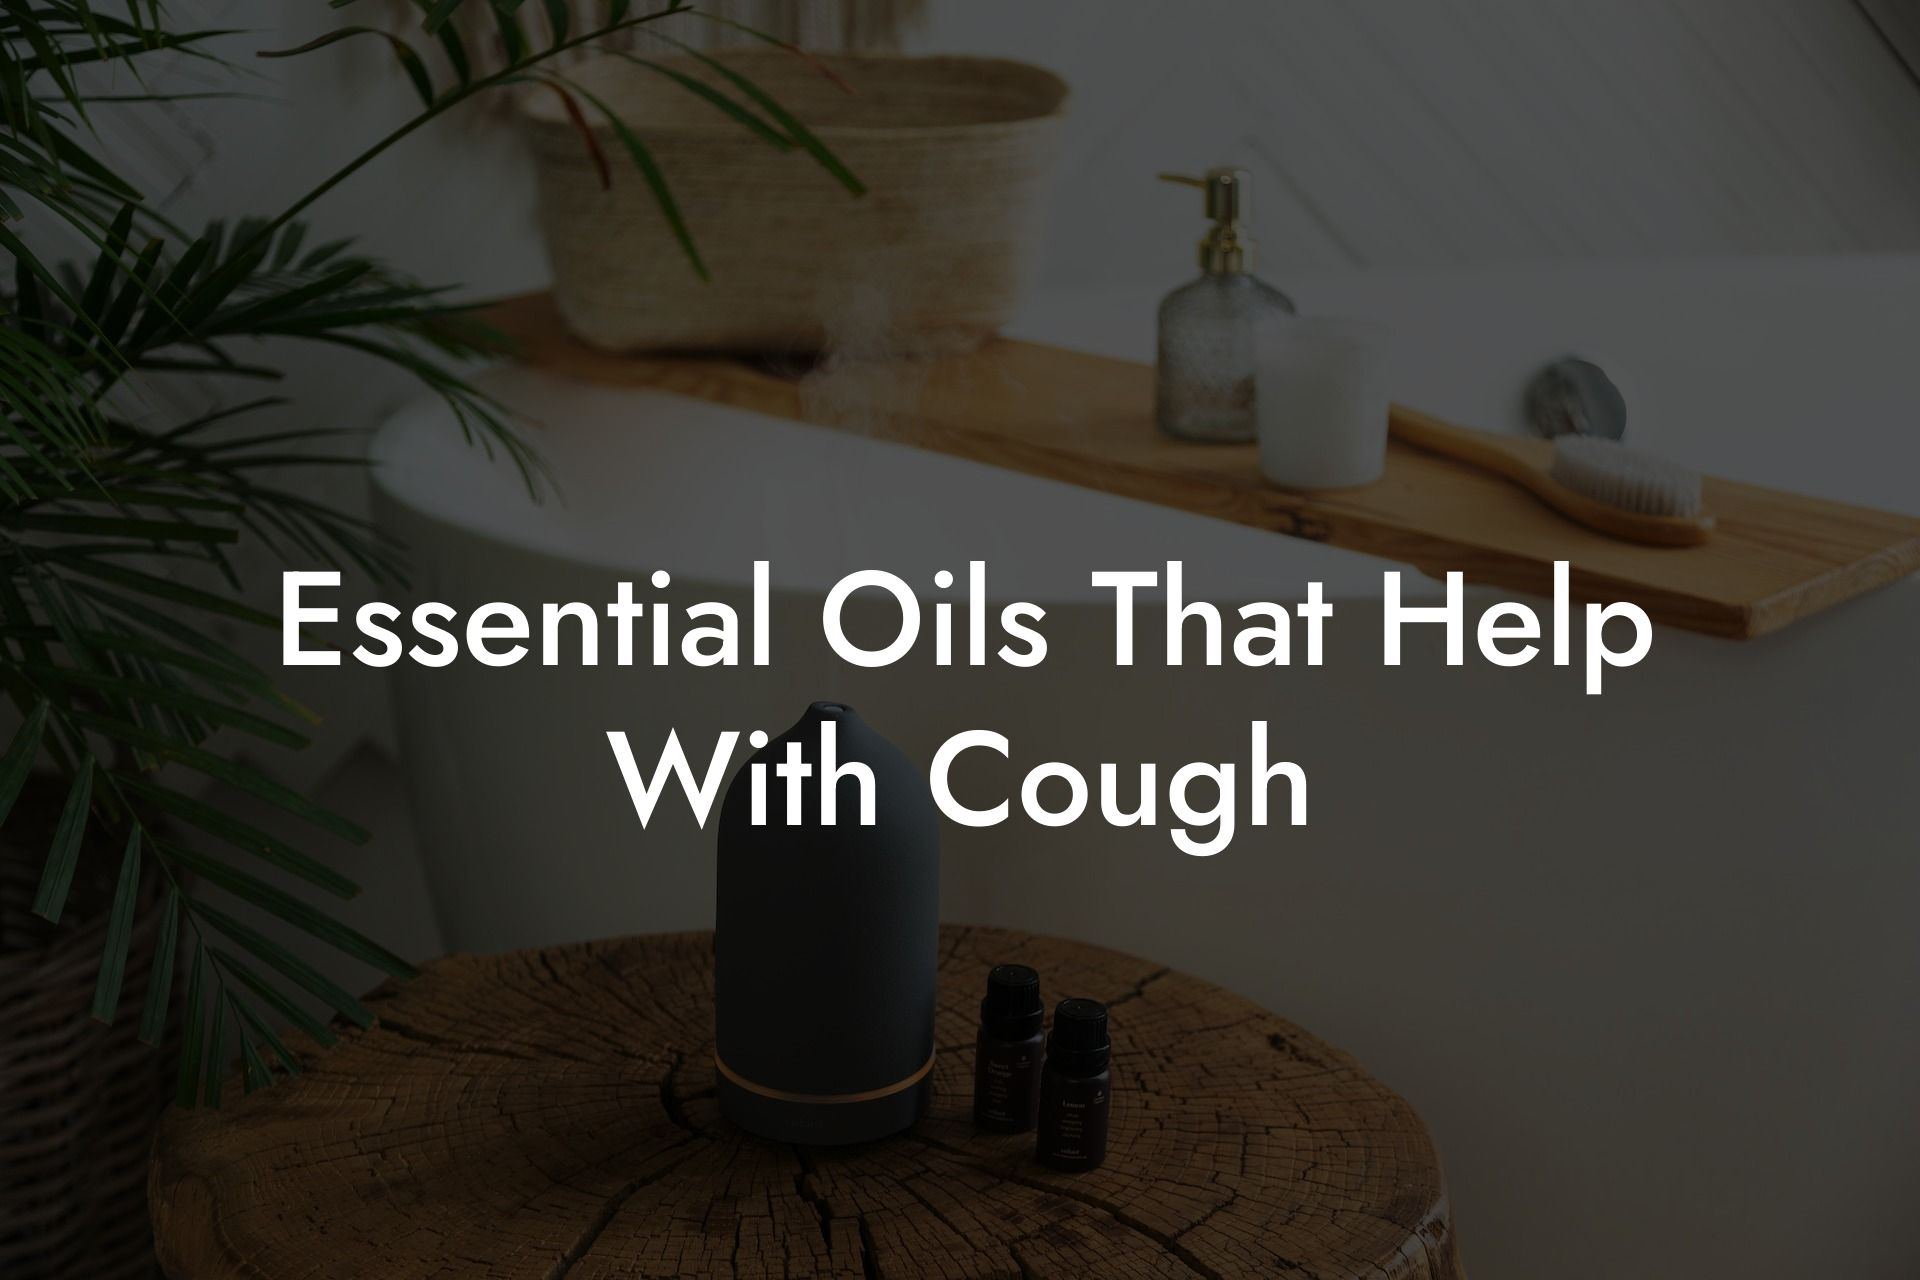 Essential Oils That Help With Cough